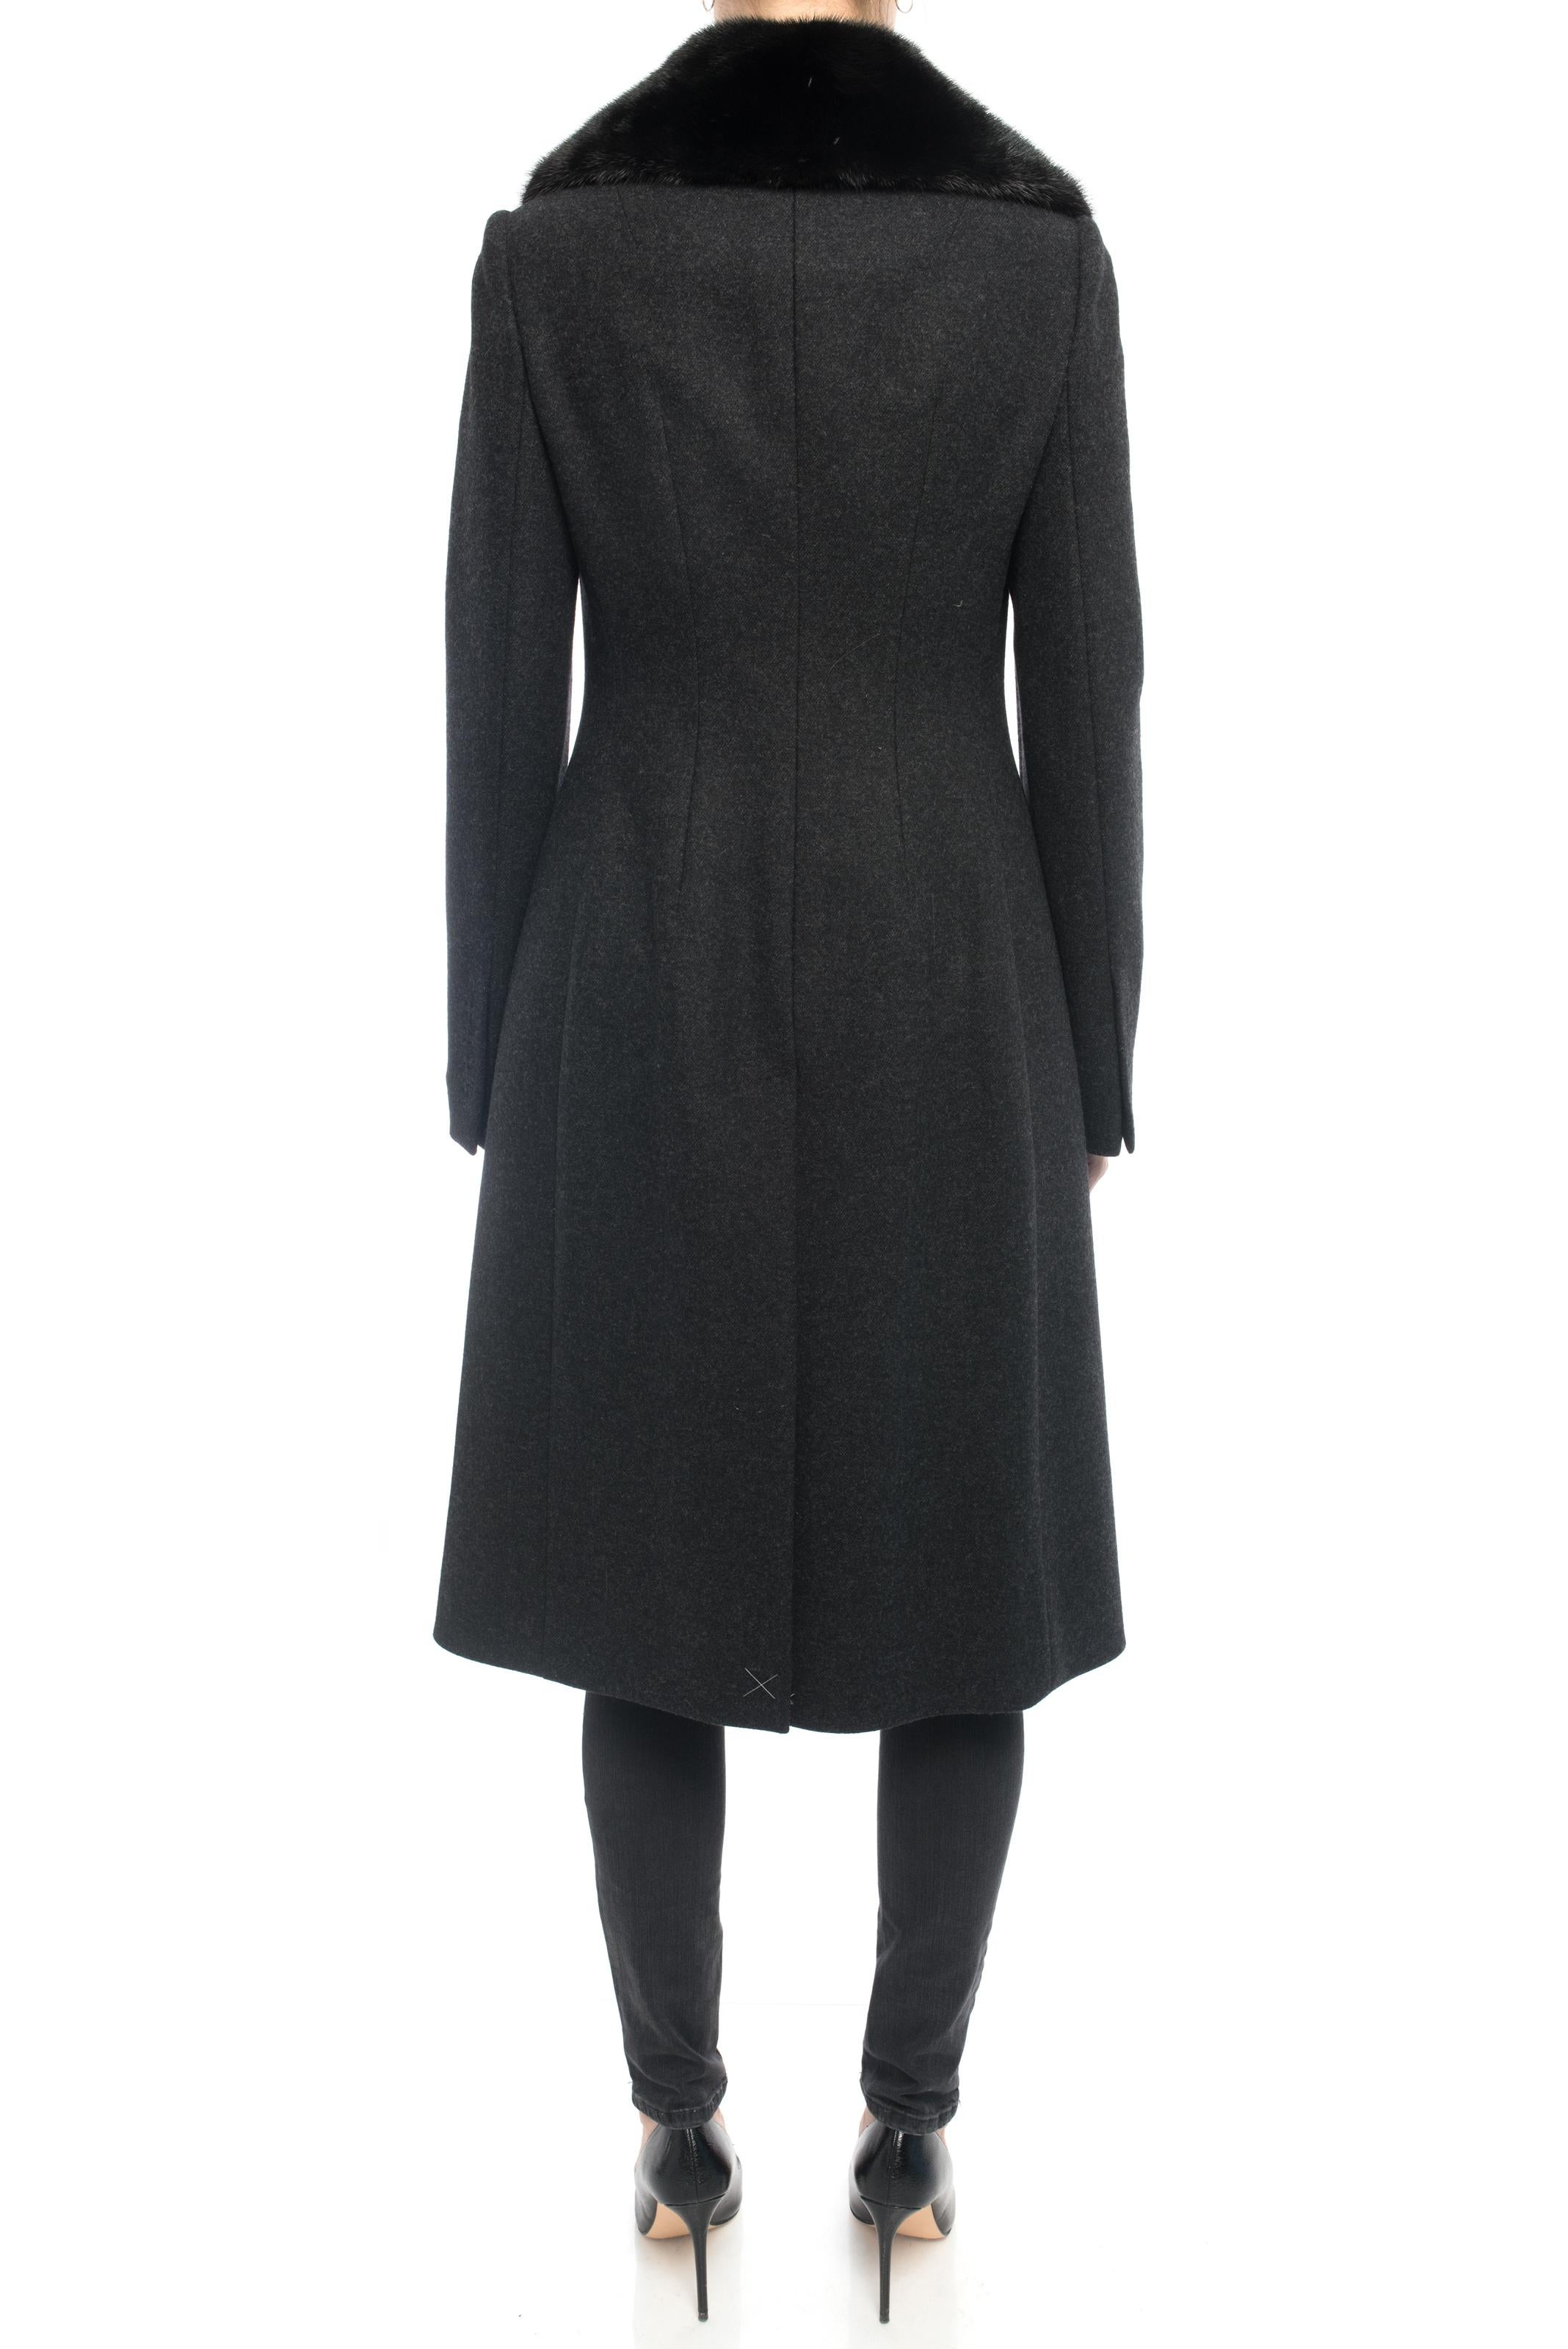 Women's Dolce & Gabbana Charcoal Grey Mink Collar Wool Coat with Jewel Buttons - S